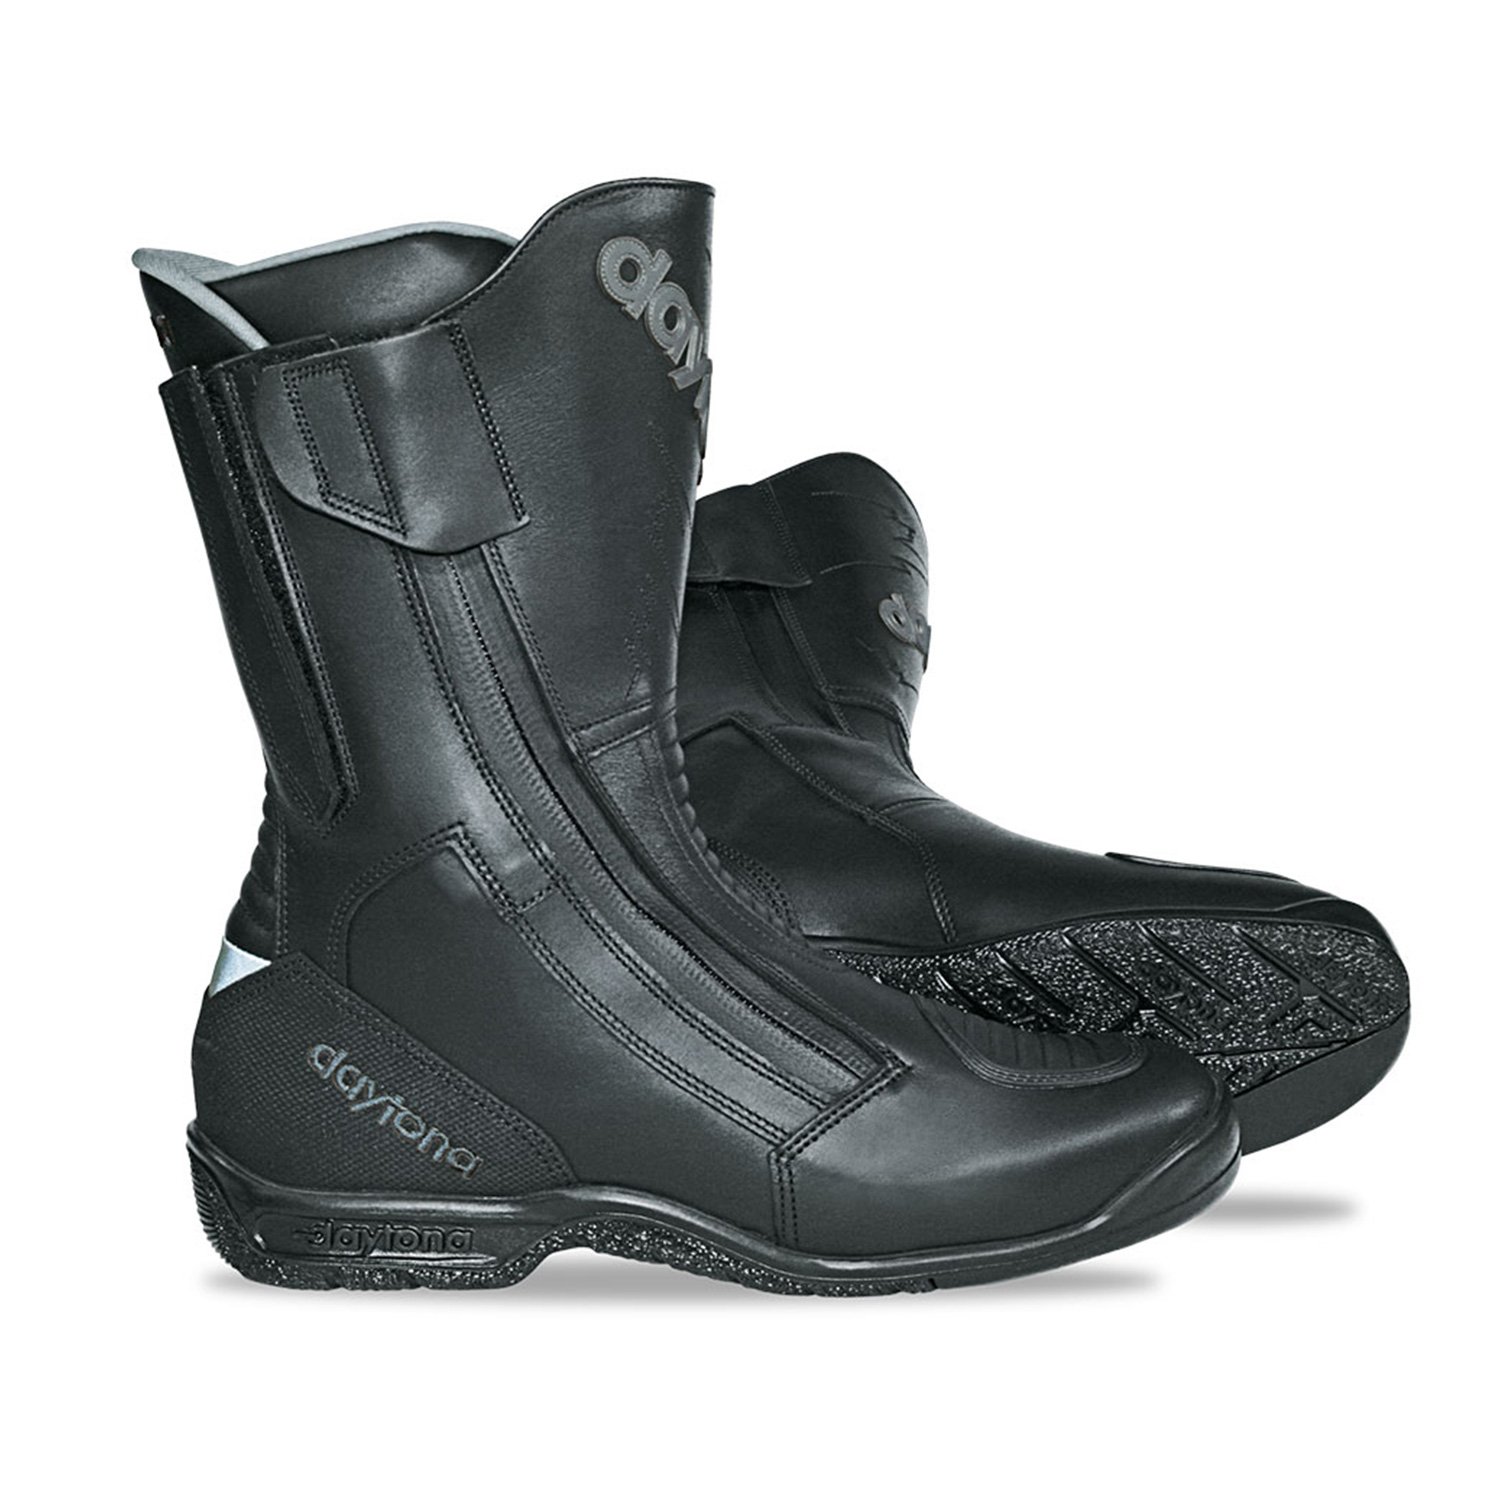 Image of Daytona Road Star X-Wide [XL] Noir Bottes Taille 50